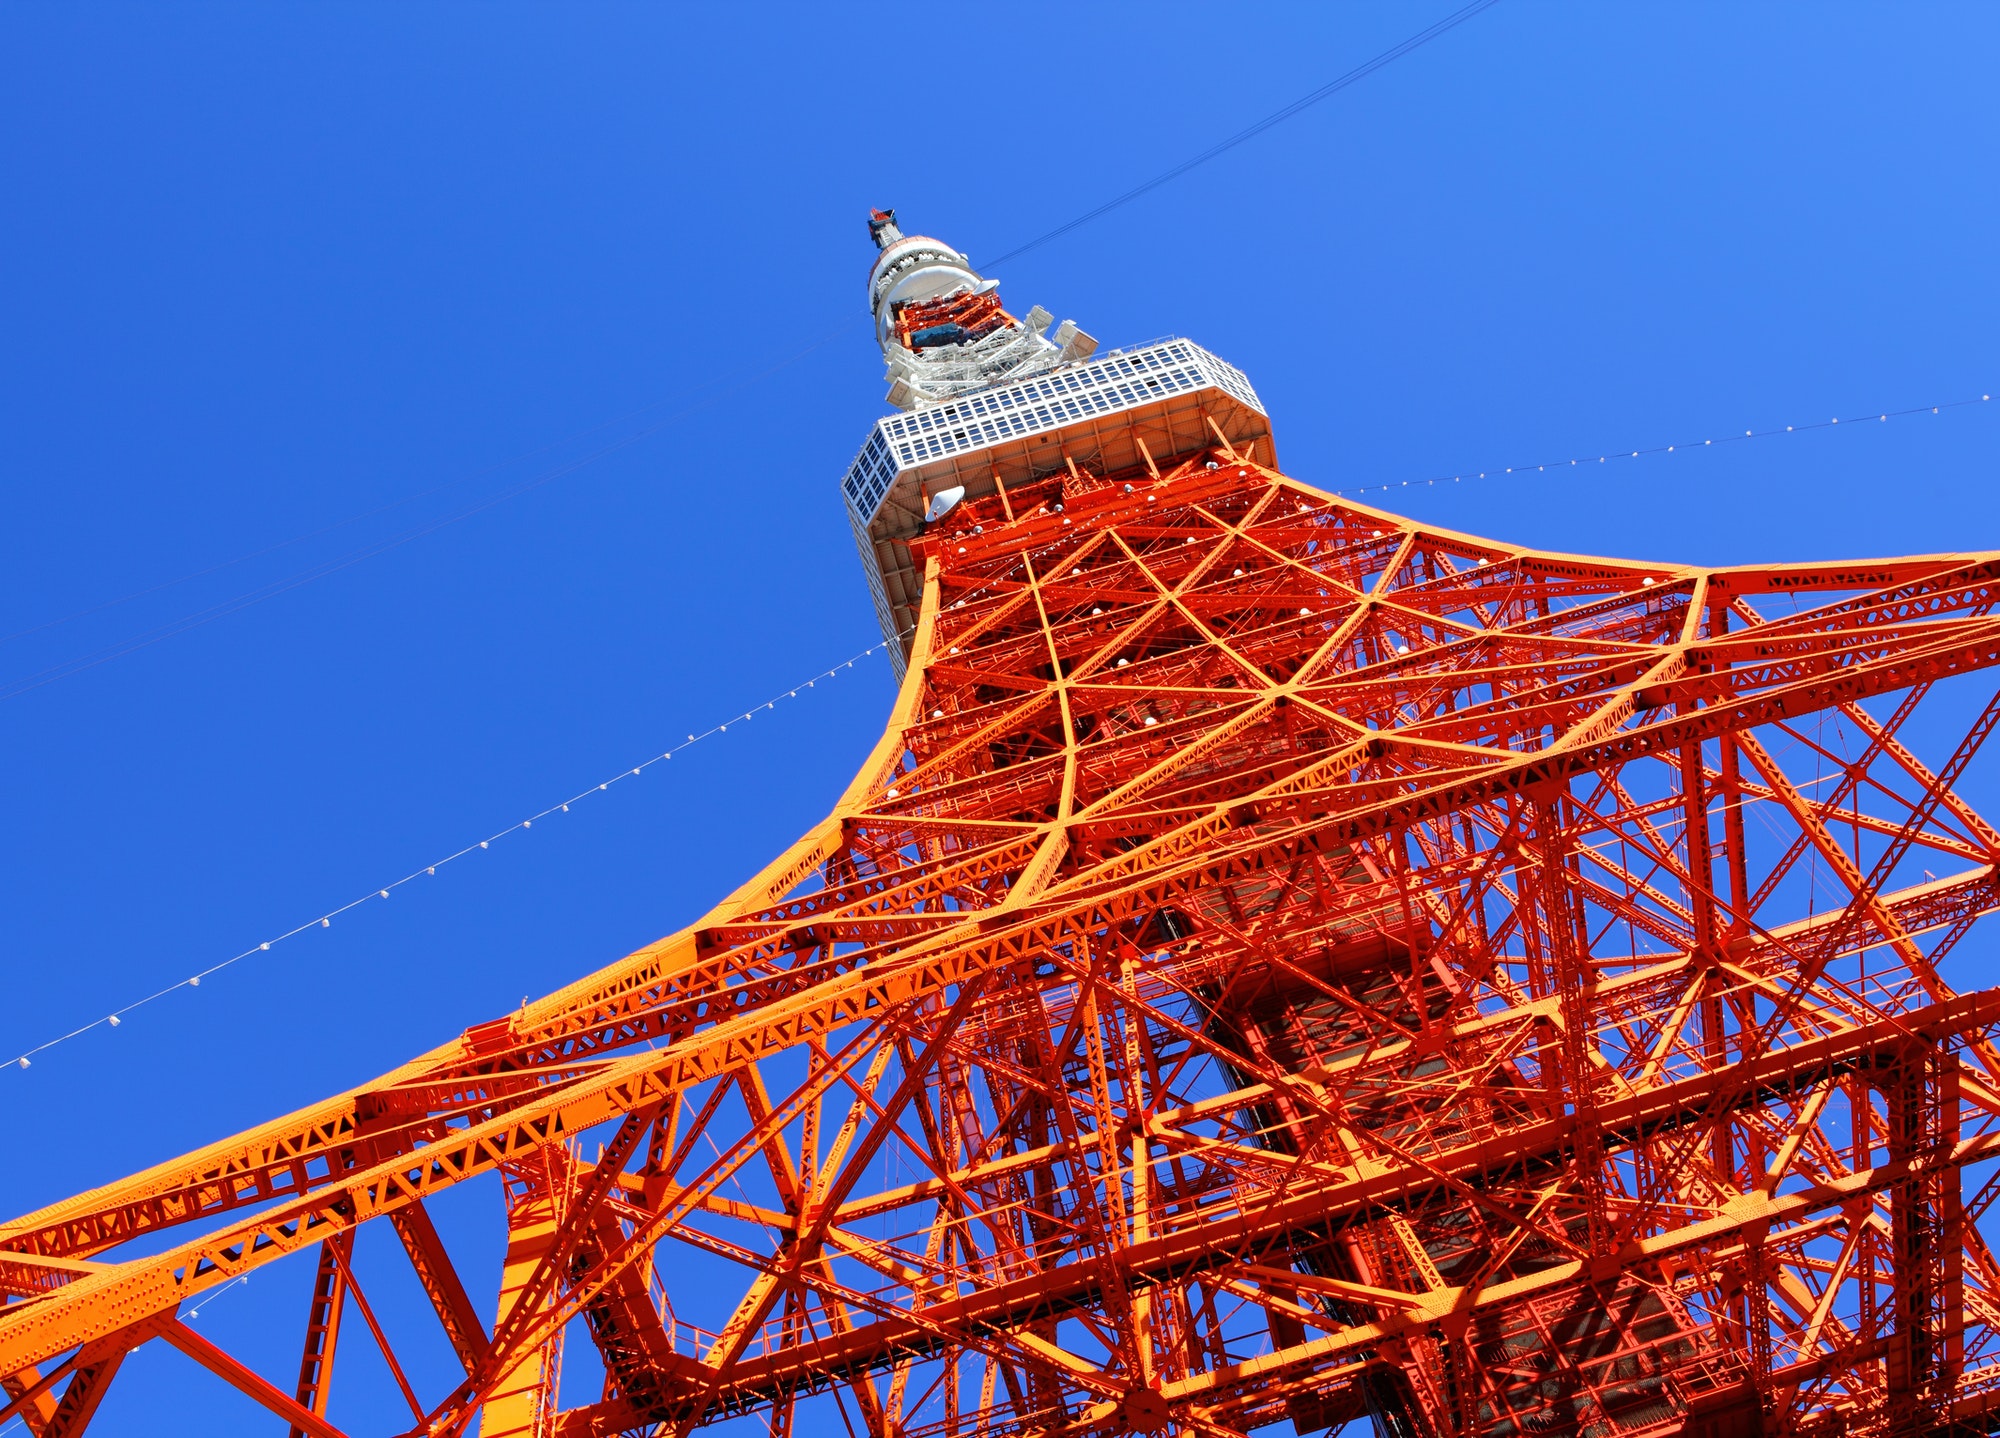 Tokyo tower from low angle